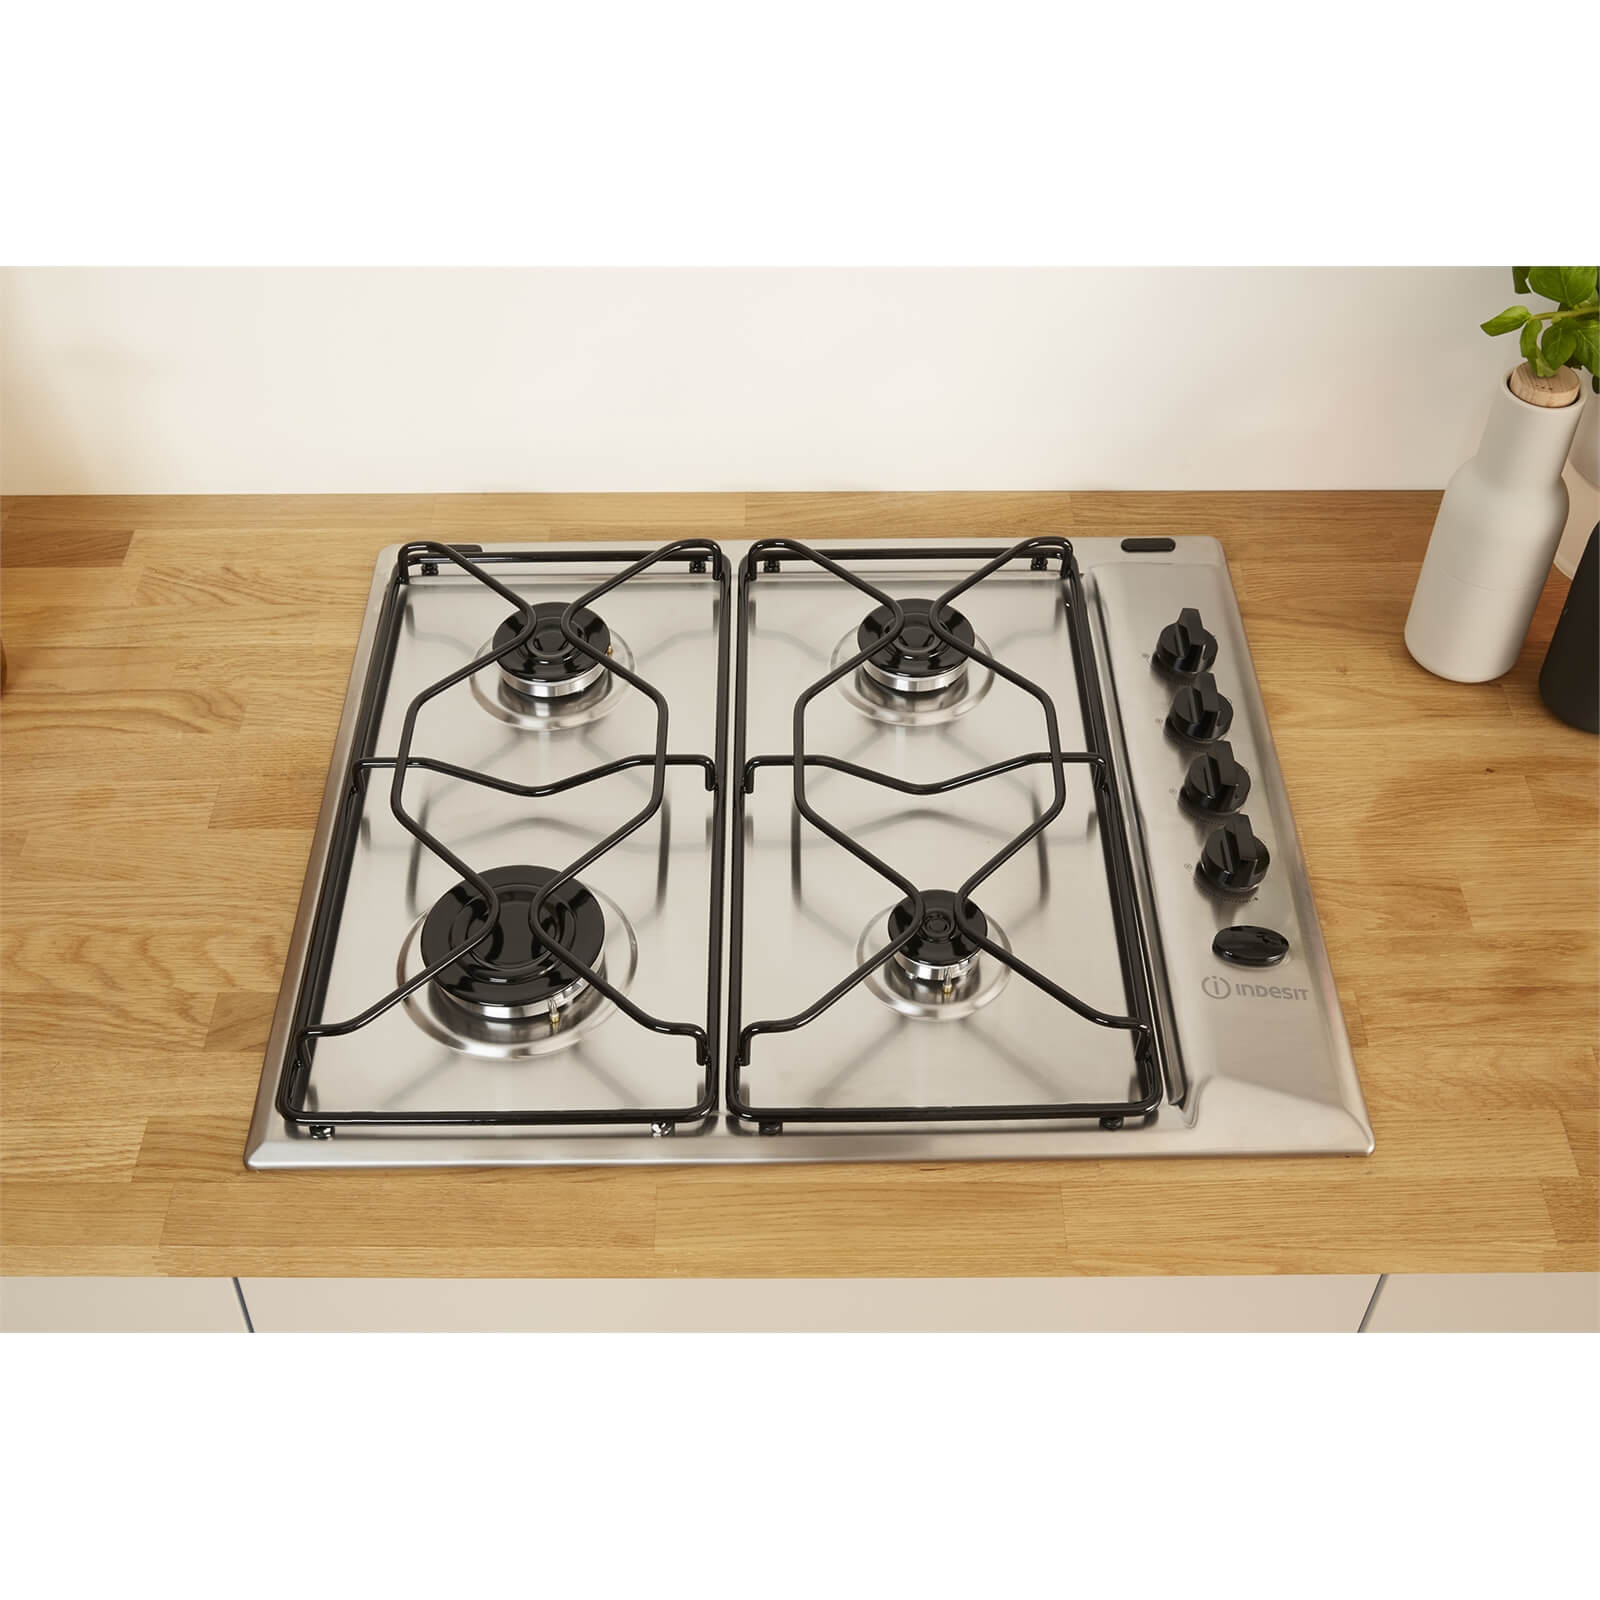 Indesit PAA 642 IX/I WE Gas Hob - Stainless Steel